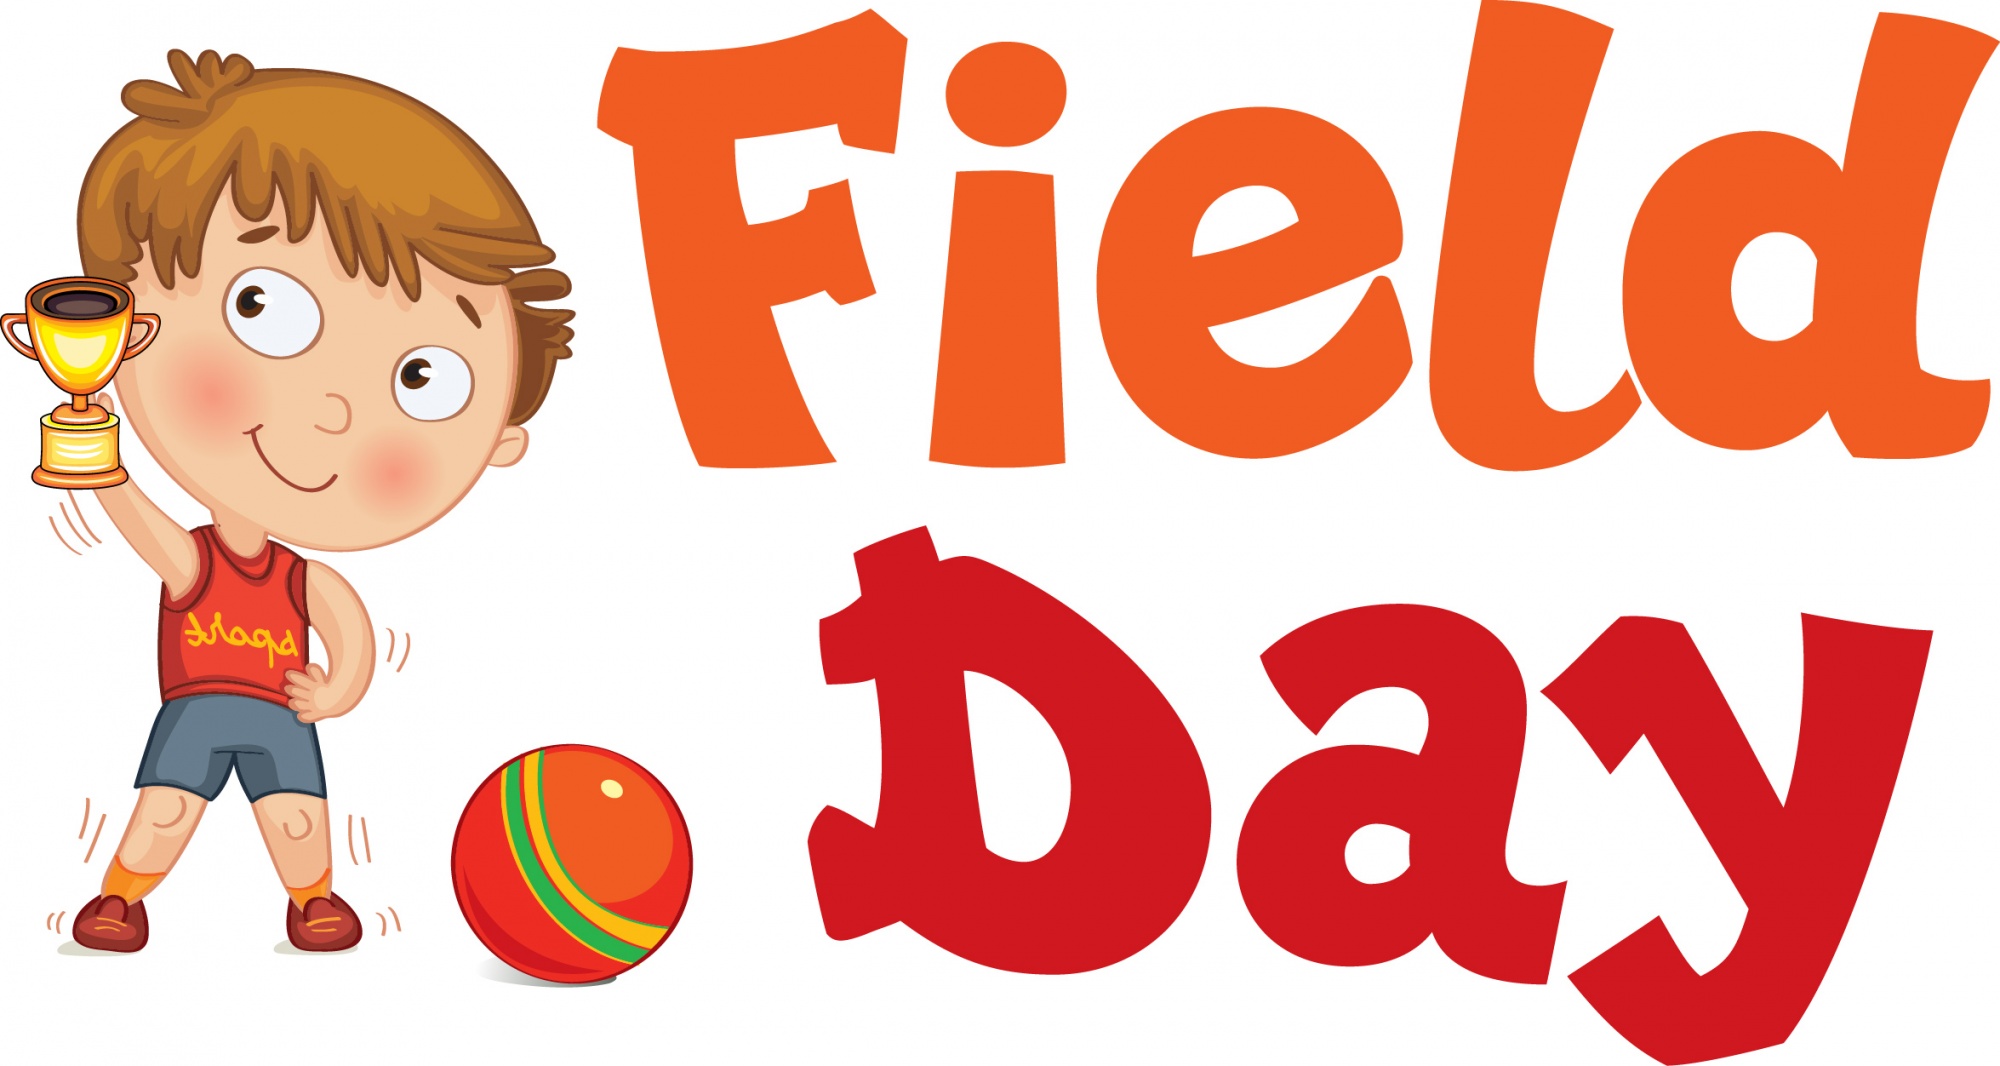 Volunteers needed for Field Day on Friday, May 23rd